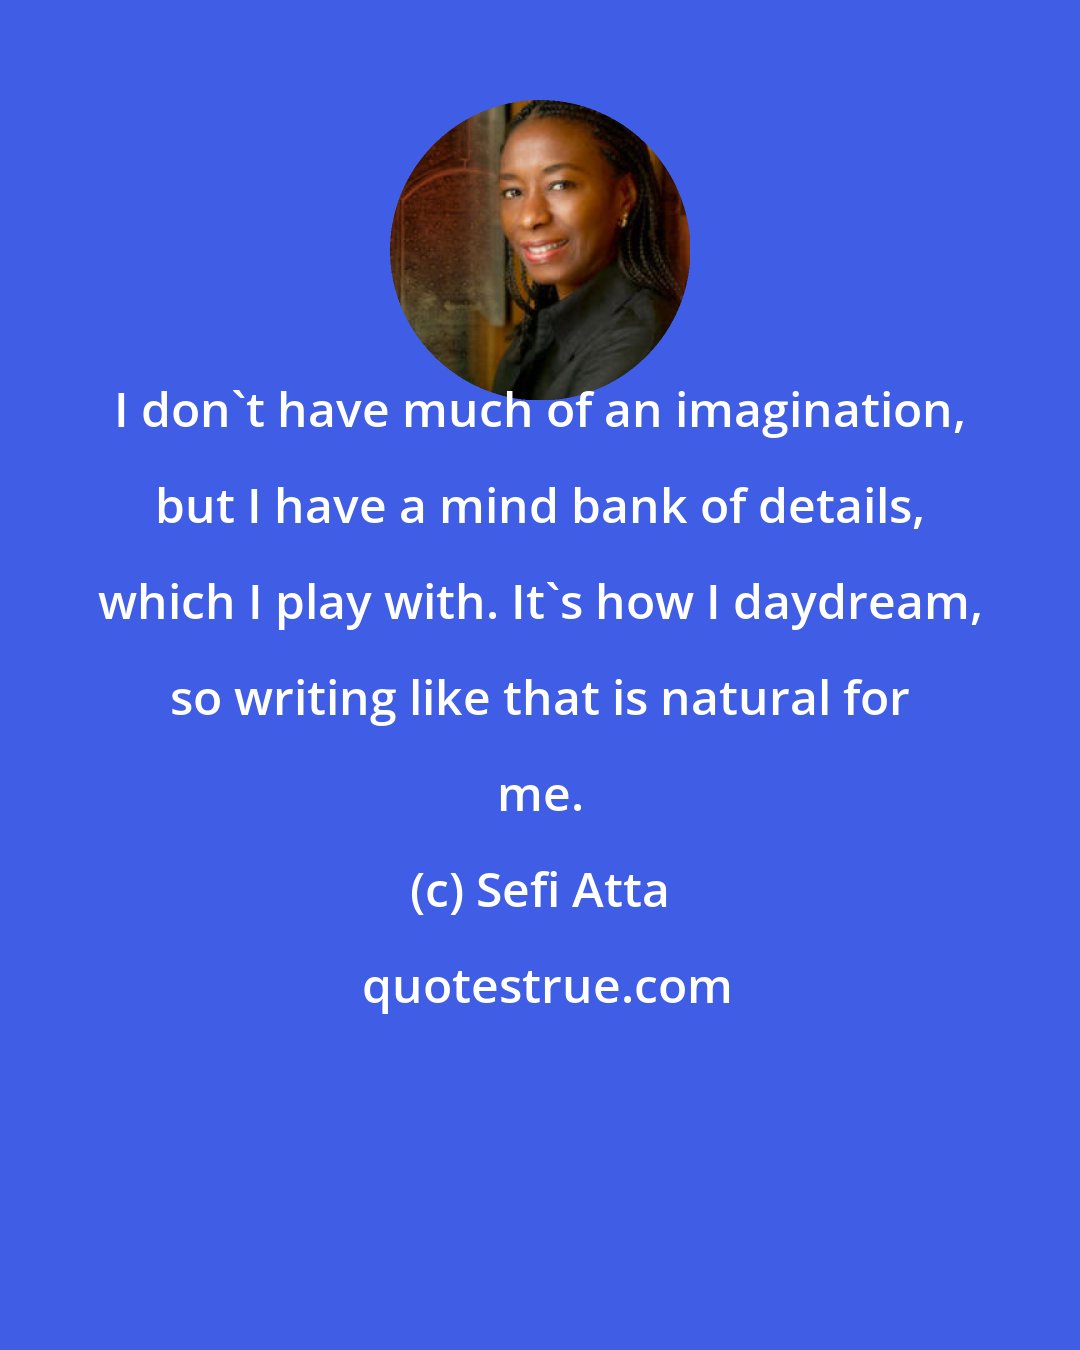 Sefi Atta: I don't have much of an imagination, but I have a mind bank of details, which I play with. It's how I daydream, so writing like that is natural for me.